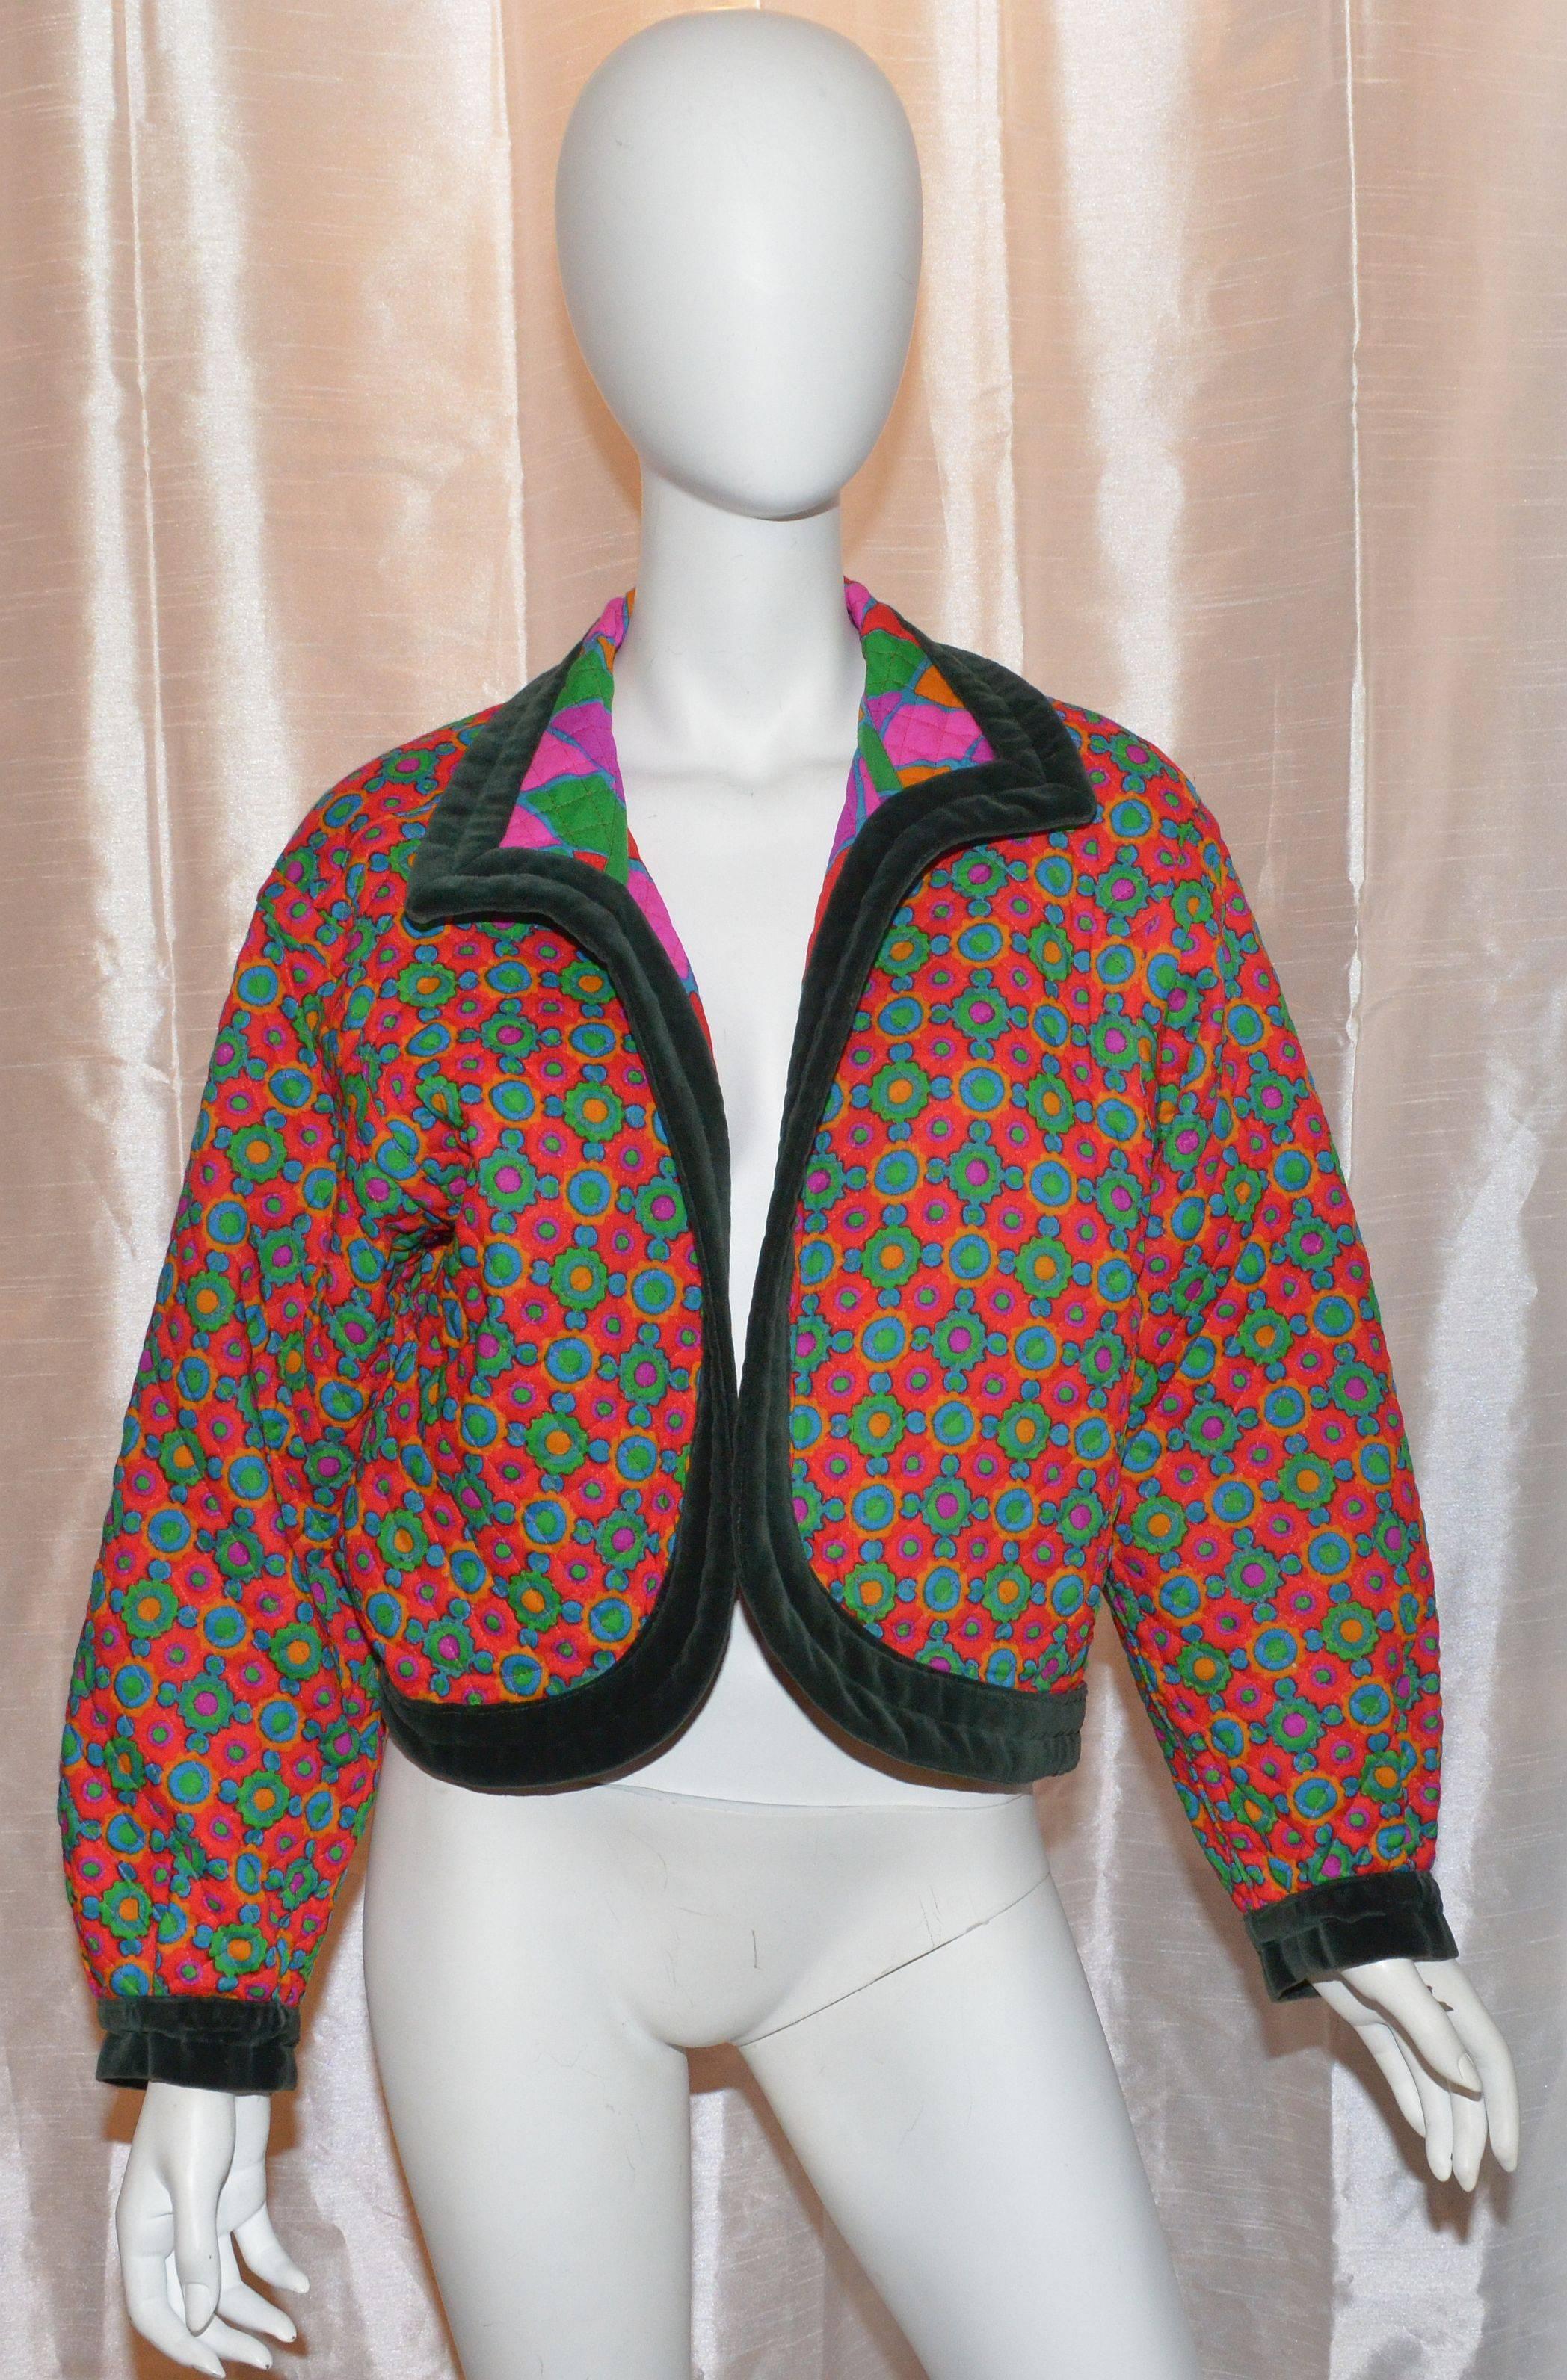 Vintage Yves Saint Laurent Quilted Reversible Chubby Jacket
Vintage Yves Saint Laurent jacket with a green velvet trim, pockets at the hem on one side, and made in France.

Measurements: 
Bust - 44''
Sleeves - 21.5''
Shoulders - 19.5''
Length